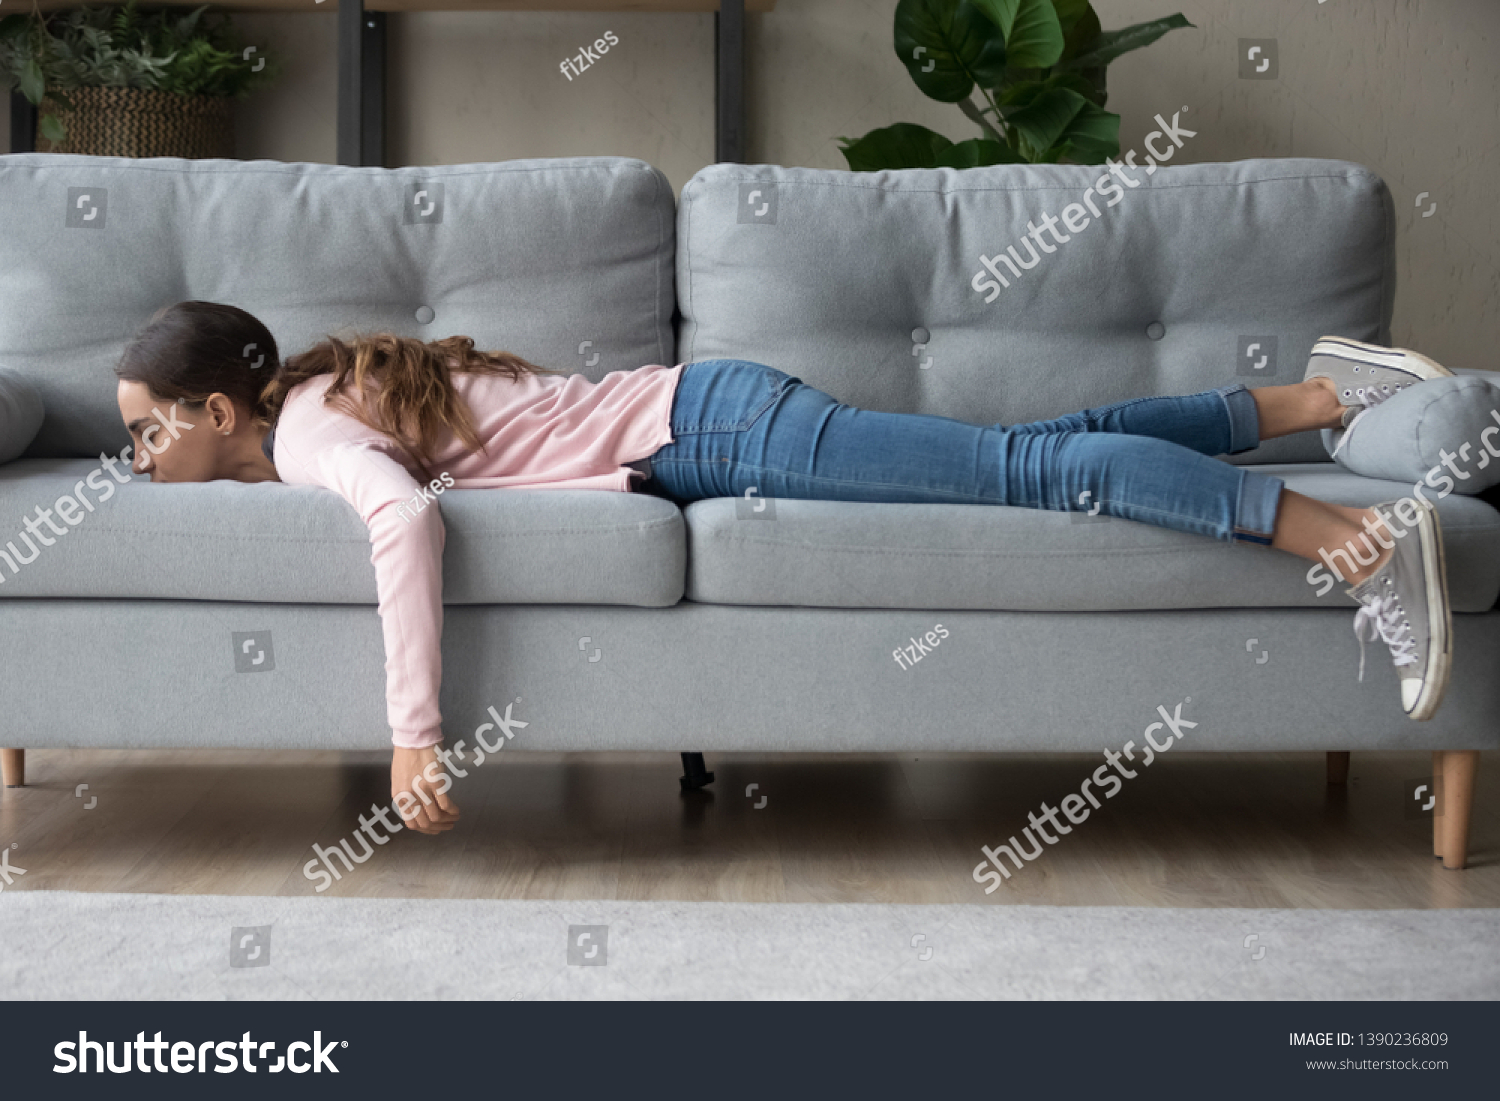 Full length of girl lying rest at home in living room buried her face in couch feels exhaustion having day nap lack of energy after party sleepless night or overworked, too tired no motivation concept #1390236809